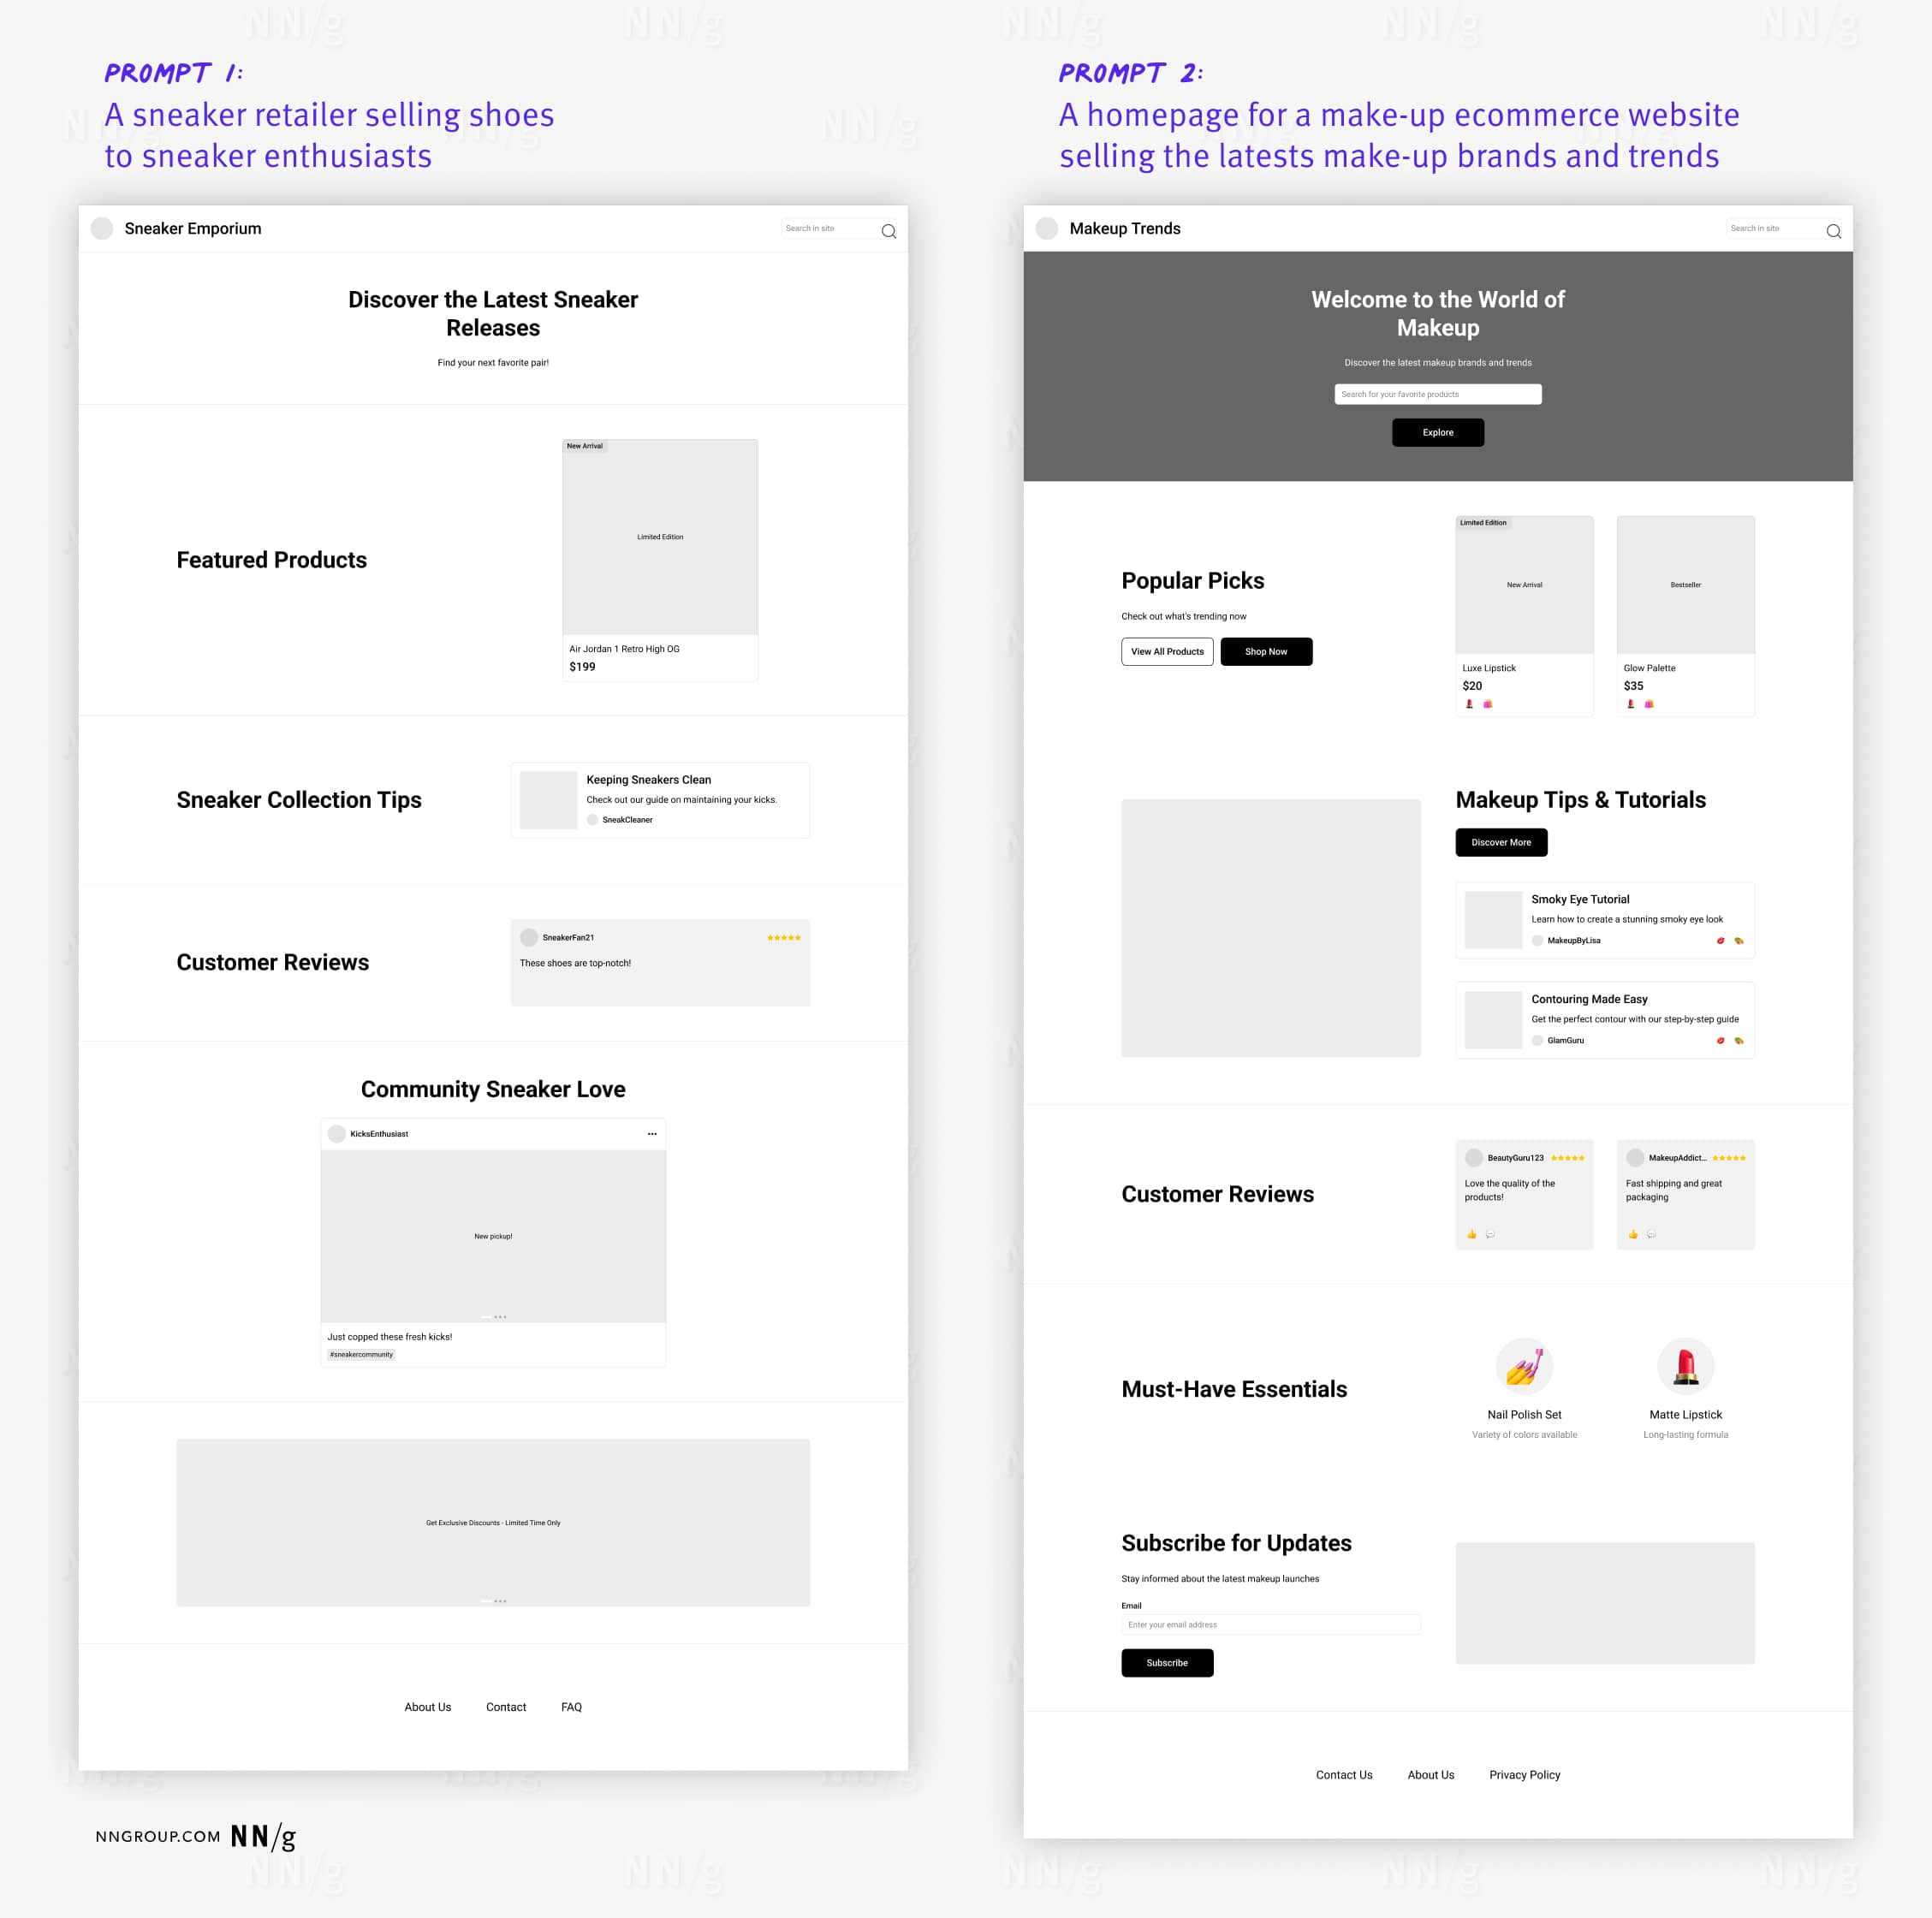 Two low fidelity wireframes generated by the Wireframe Designer plugin. The left wireframe was generated for the prompt "Prompt 1: A sneaker retailer selling shoes to sneaker enthusiasts." The right wireframe was generated for the prompt "A homepage for a make-up e-commerce website selling the latests make-up brands and trends"